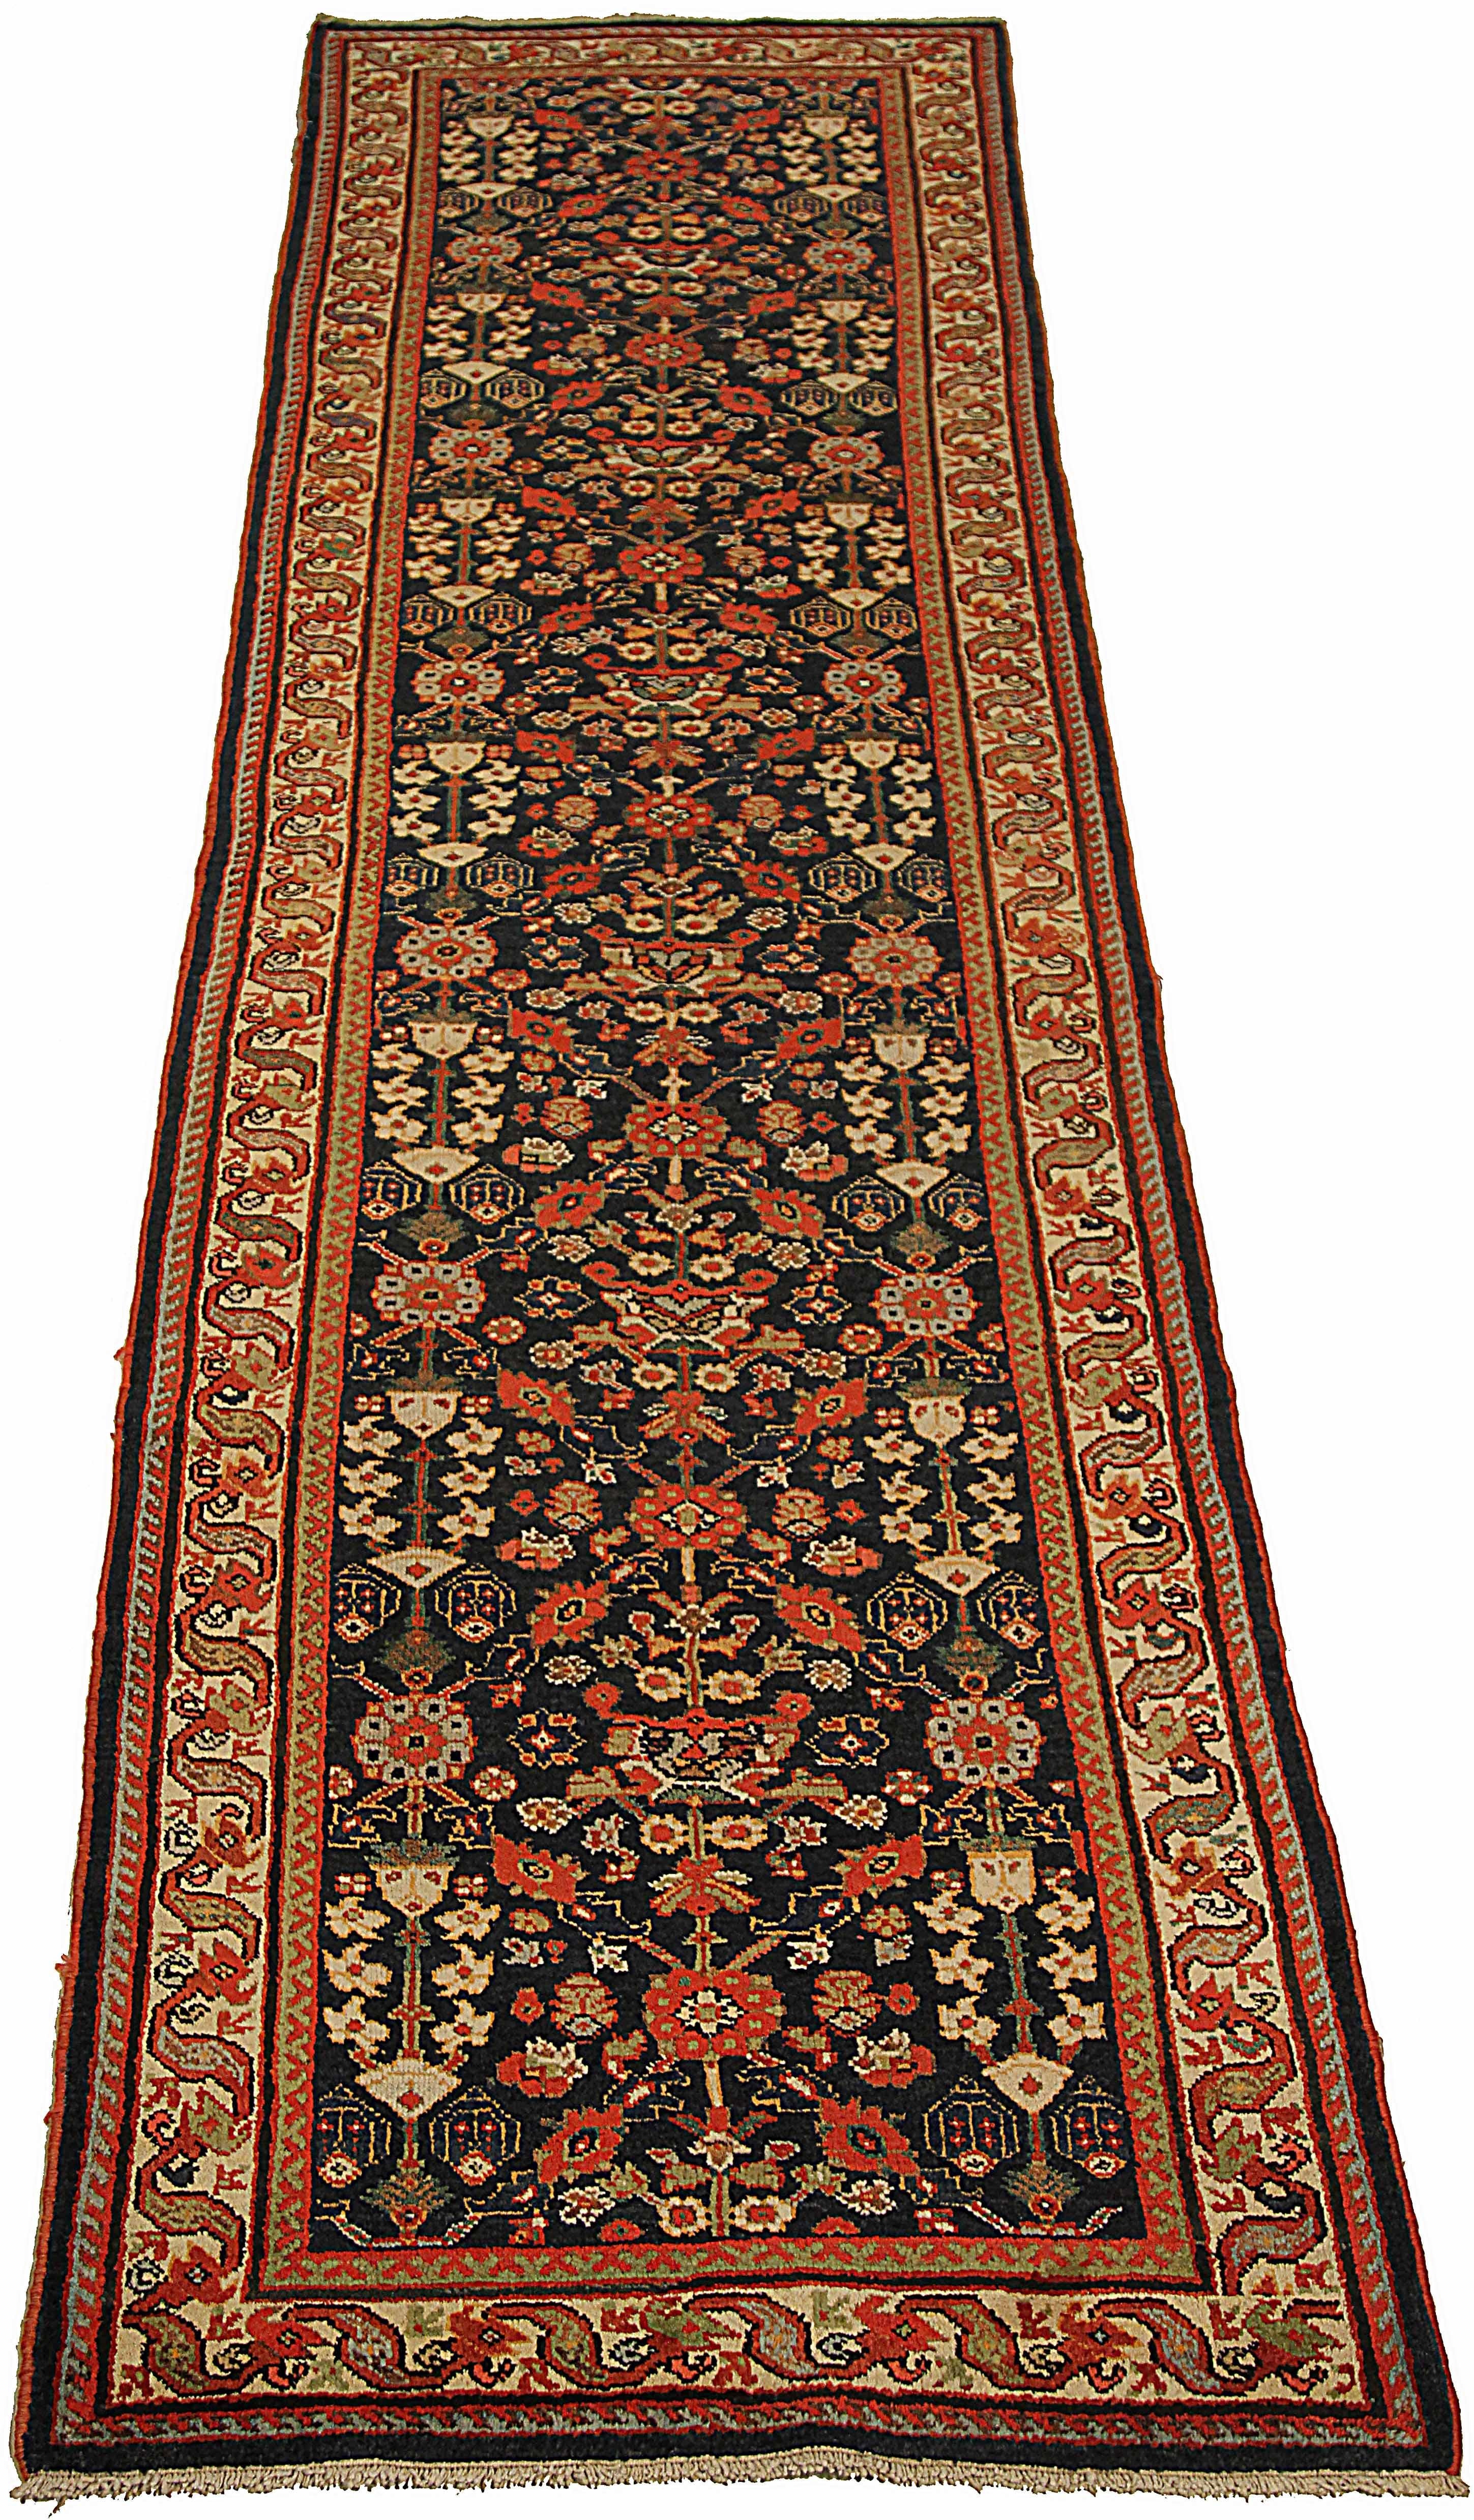 Antique Persian runner rug handwoven from the finest sheep’s wool. It’s colored with all-natural vegetable dyes that are safe for humans and pets. It’s a traditional Mahal design handwoven by expert artisans. It’s a lovely runner rug that can be